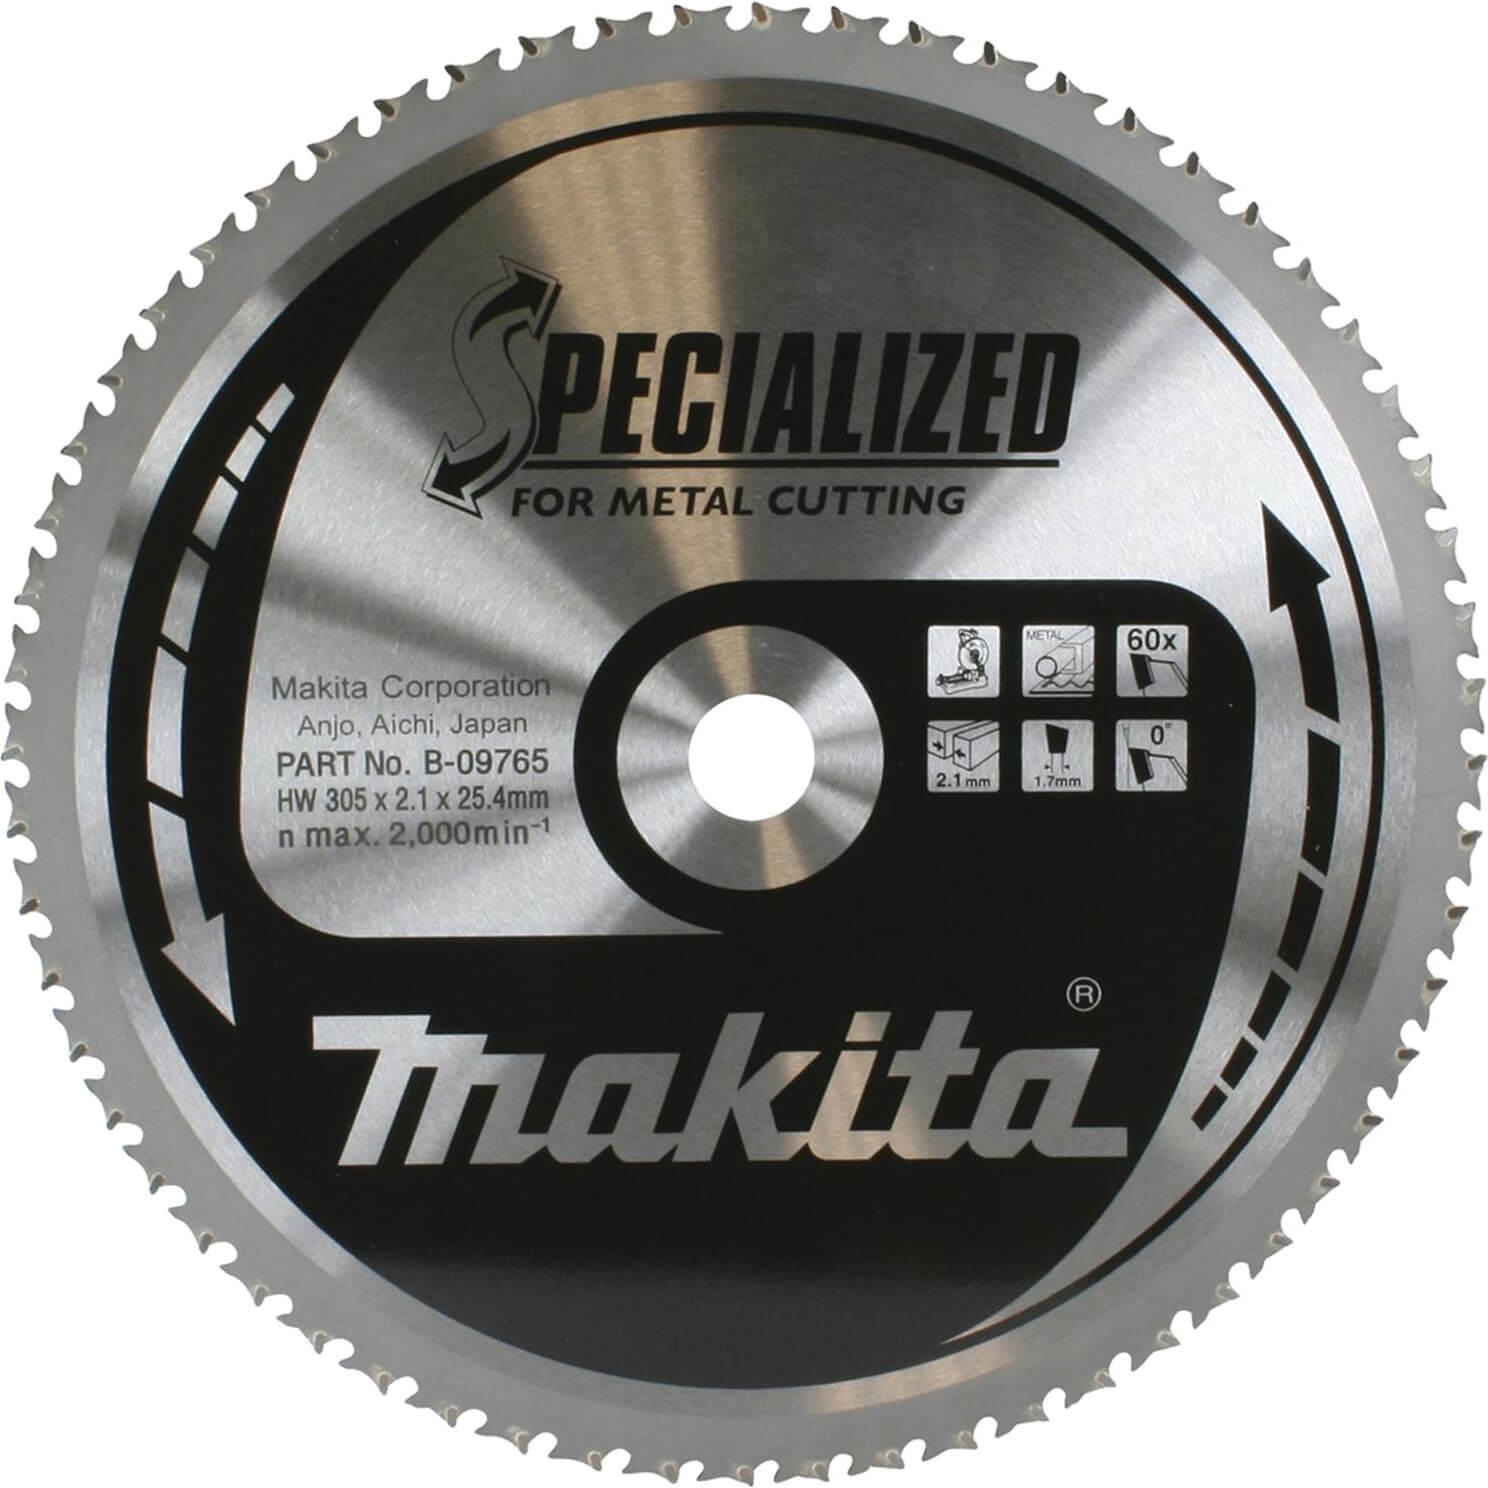 Image of Makita SPECIALIZED Metal Cutting Saw Blade 305mm 60T 25.4mm